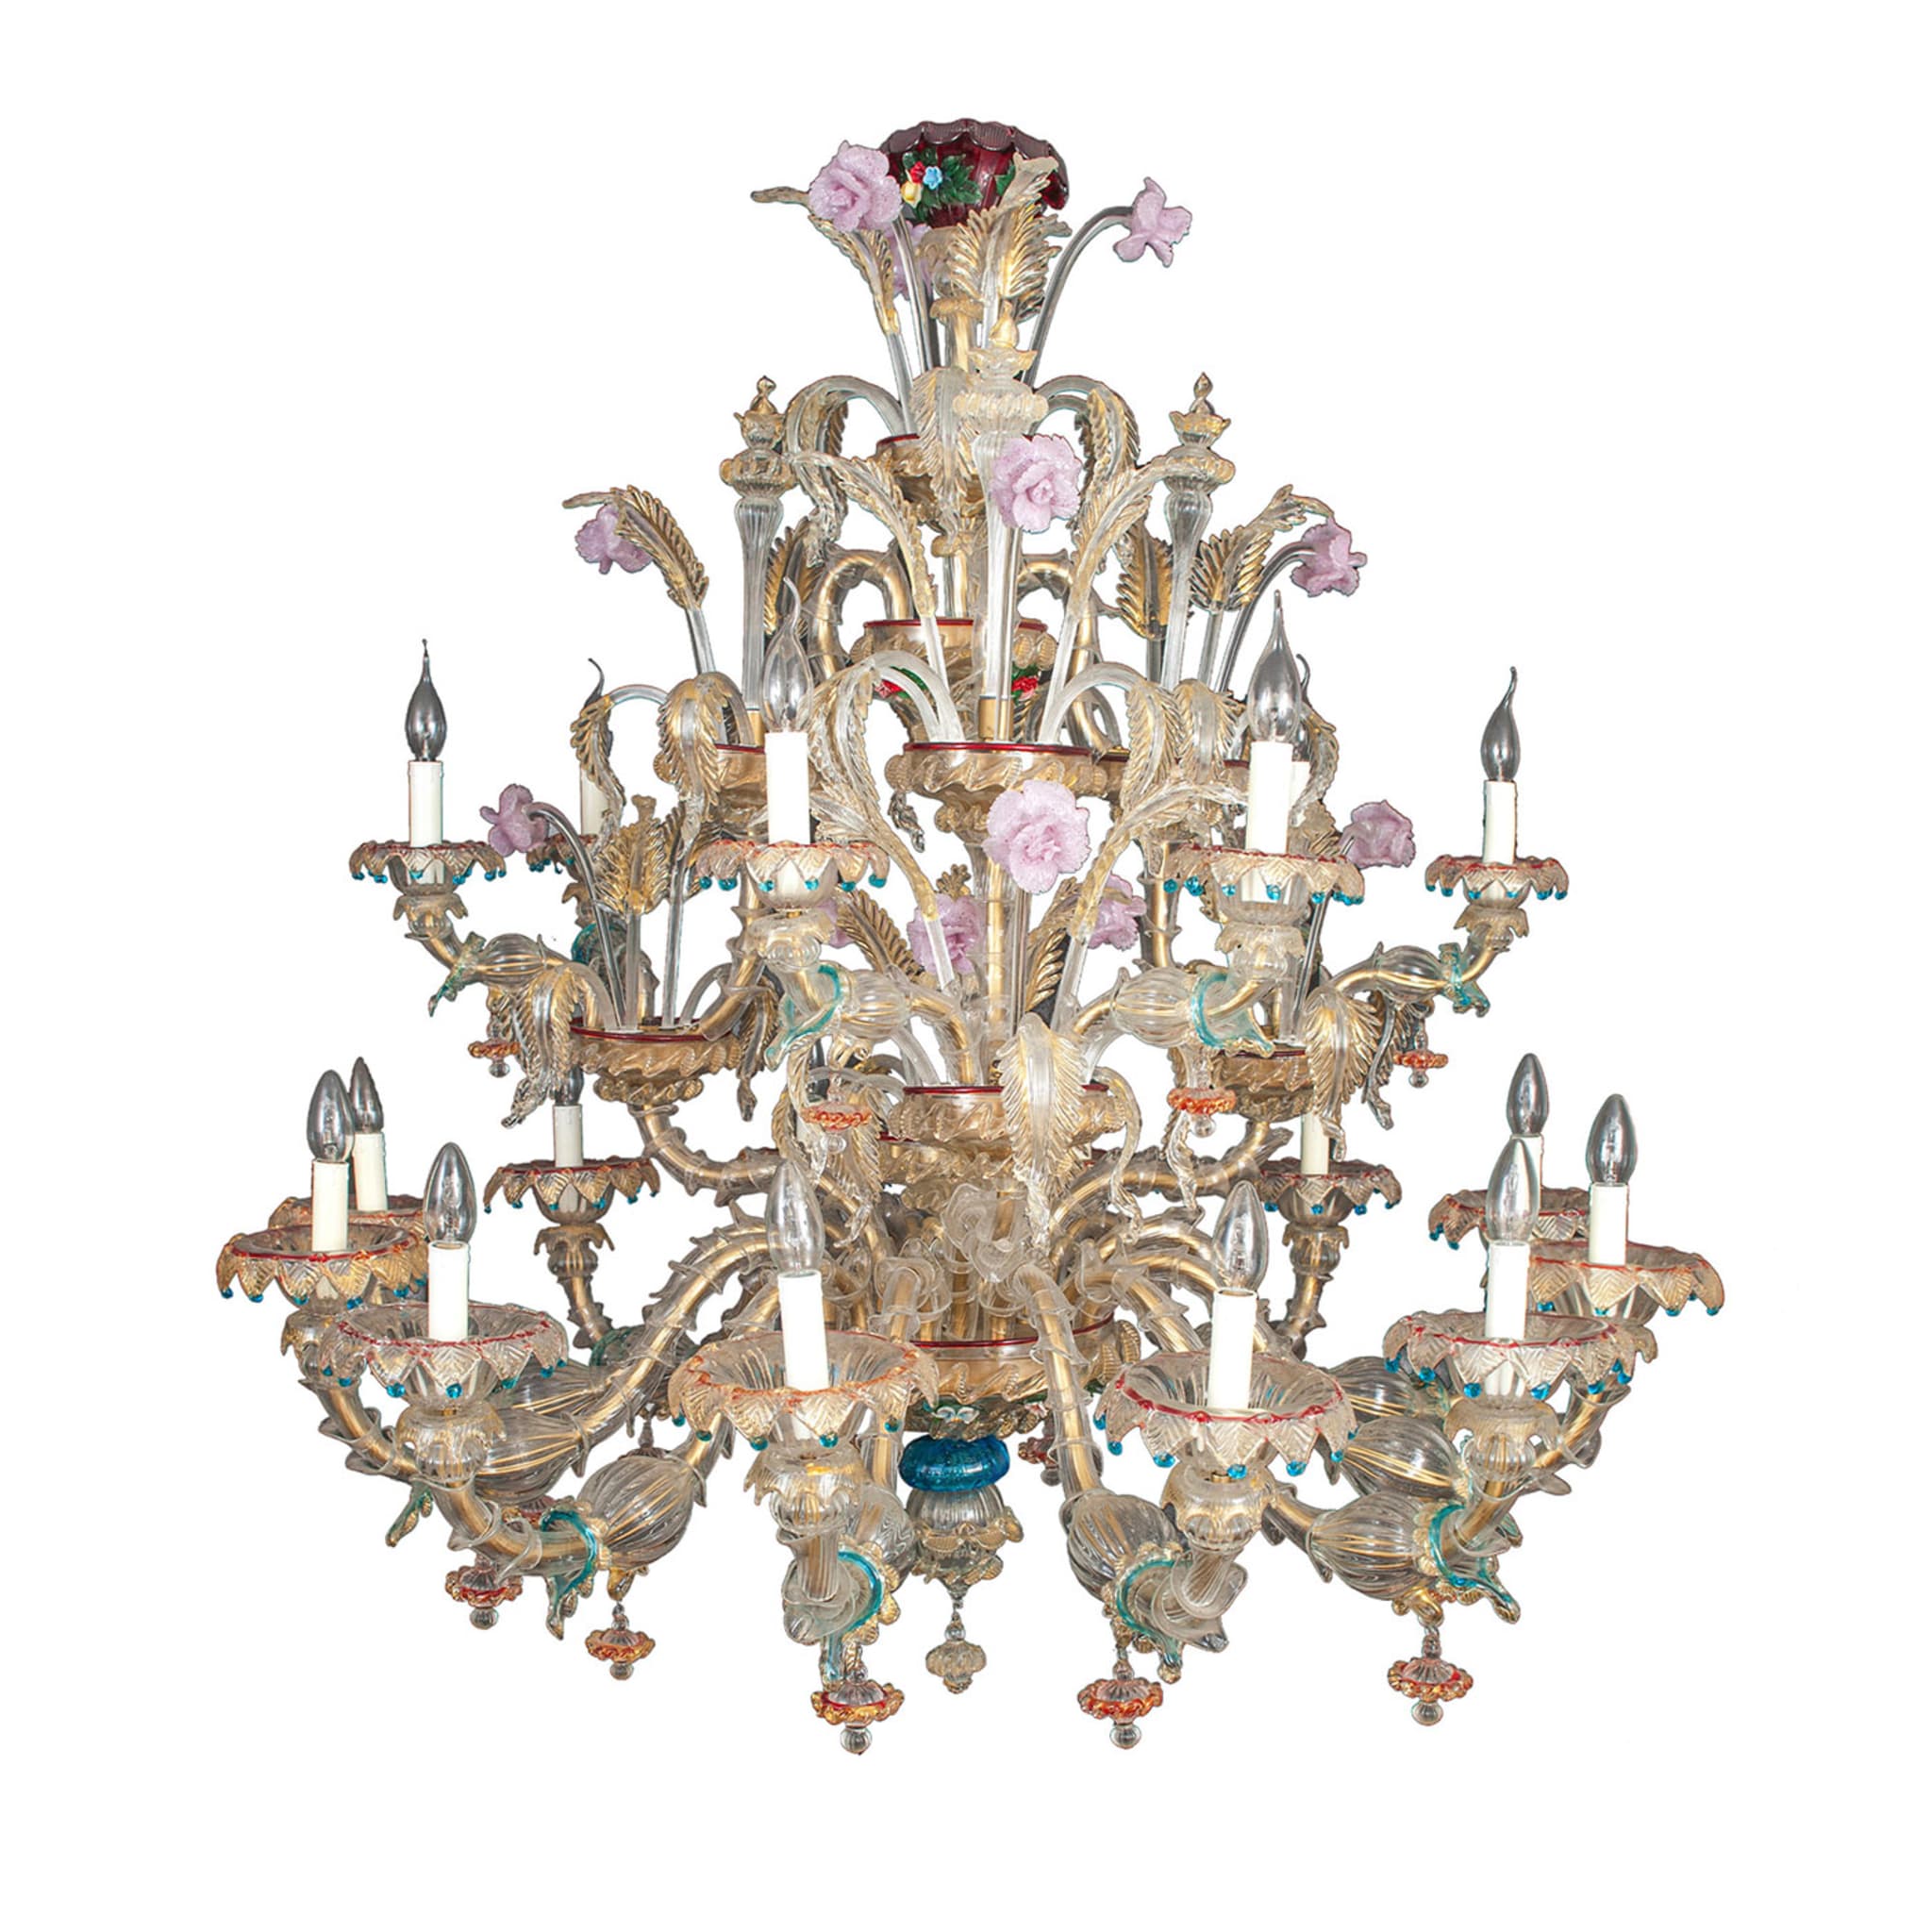 Rezzonico-style Gold and Crystal Chandelier #5 - Main view